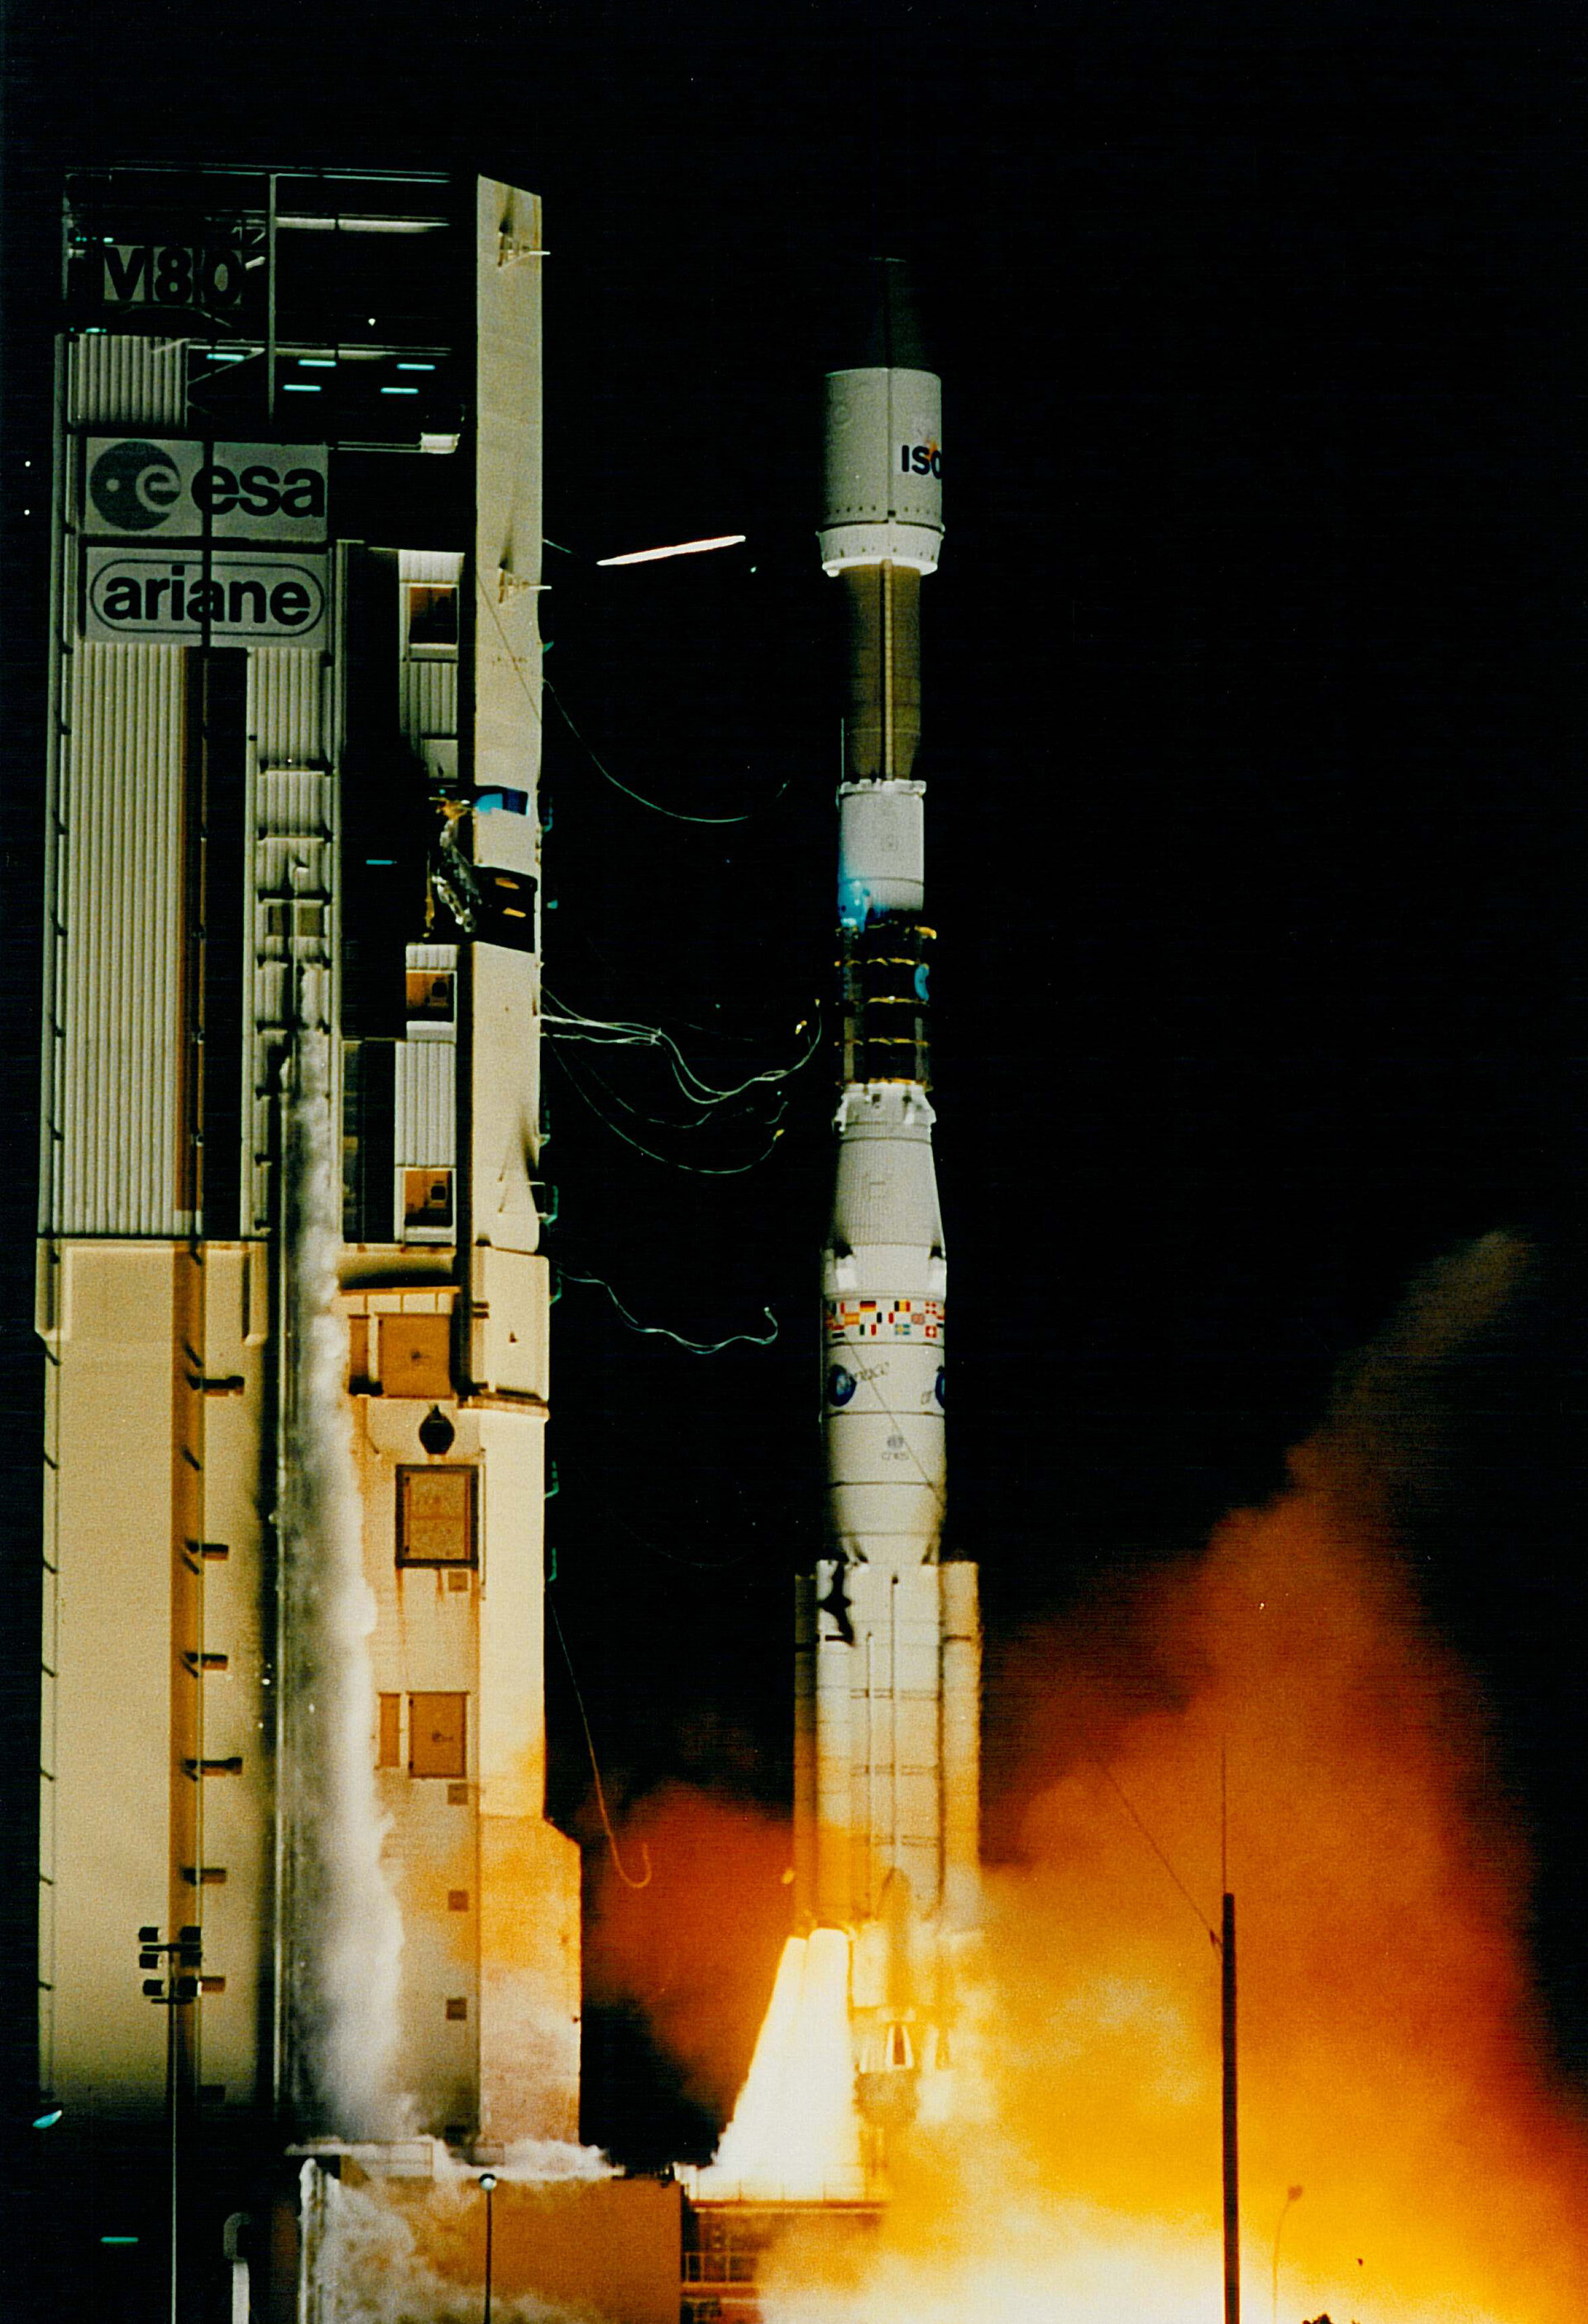 Launch of ISO on board Ariane, 1995